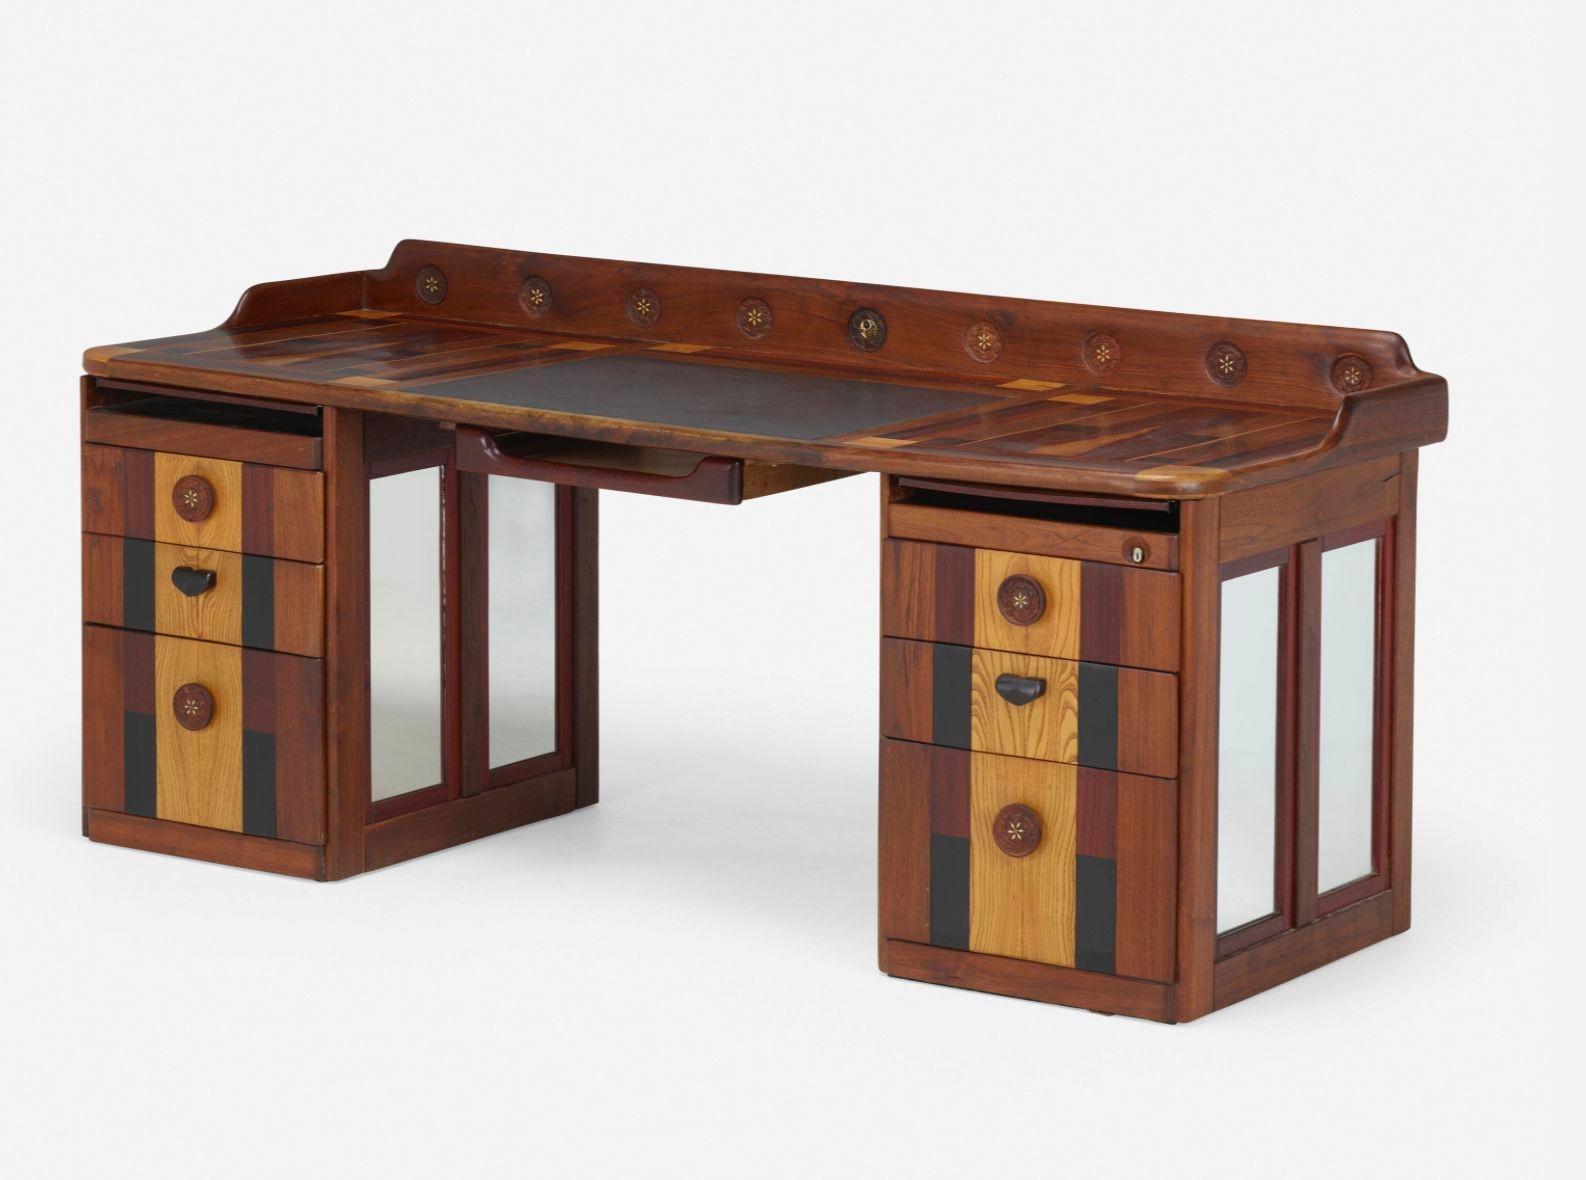 Phillip Lloyd Powell American Craft Custom Double Pedestal Desk, This remarkable American Craft Double Pedestal Desk by Powell Studio was custom-made in 1995. The desk boasts a total of seven drawers and discreet desktop glides, showcasing a